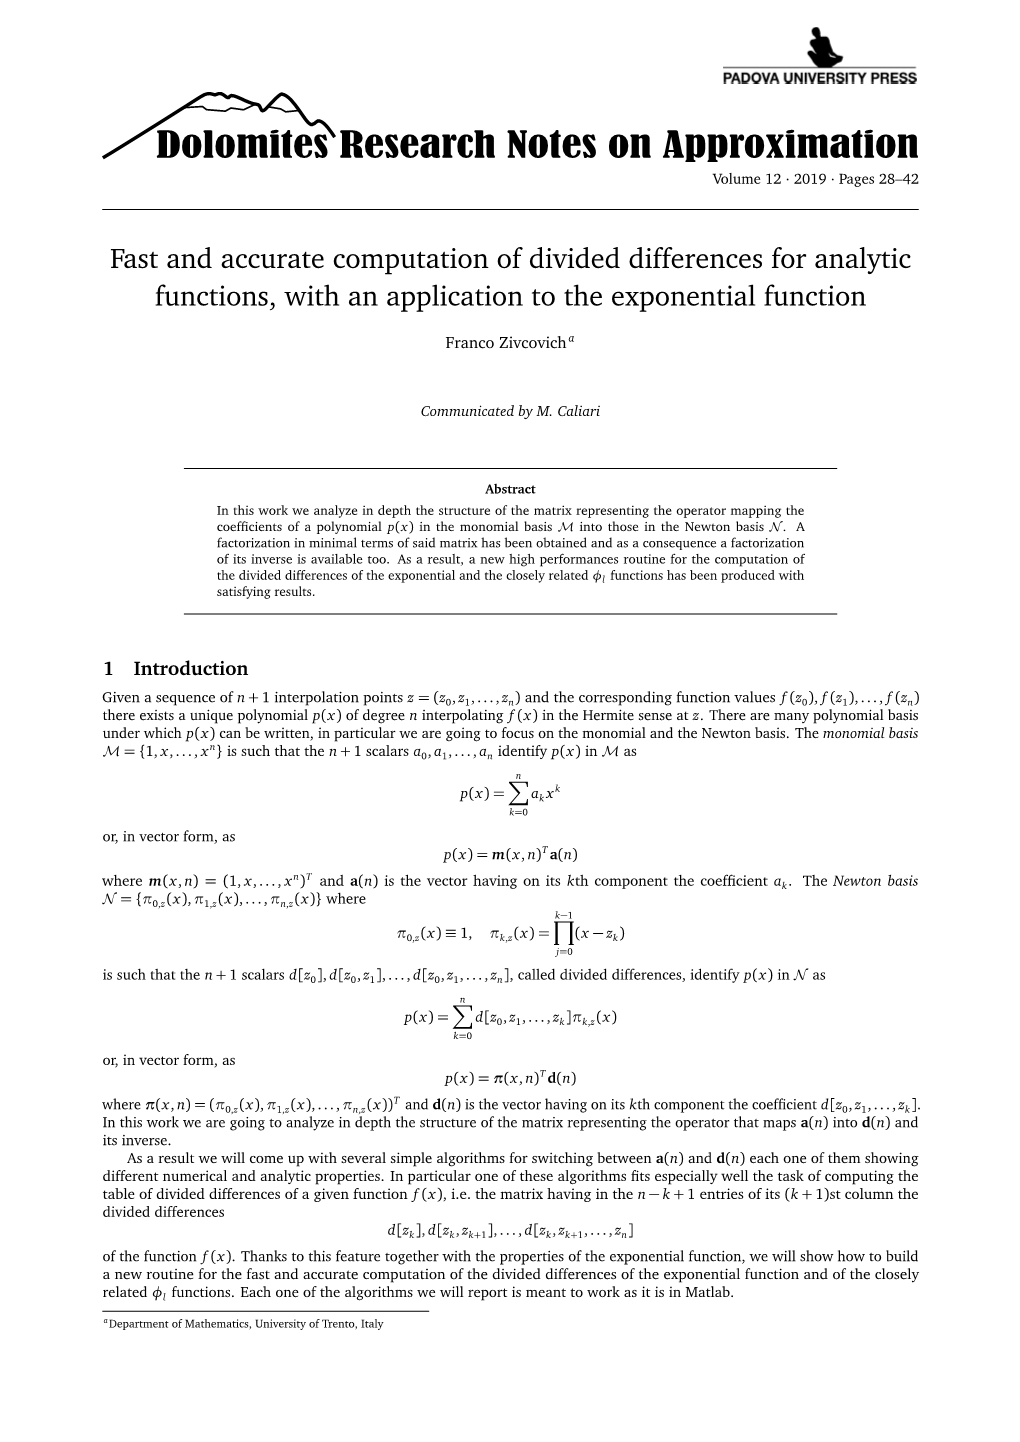 Fast and Accurate Computation of Divided Differences for Analytic Functions, with an Application to the Exponential Function